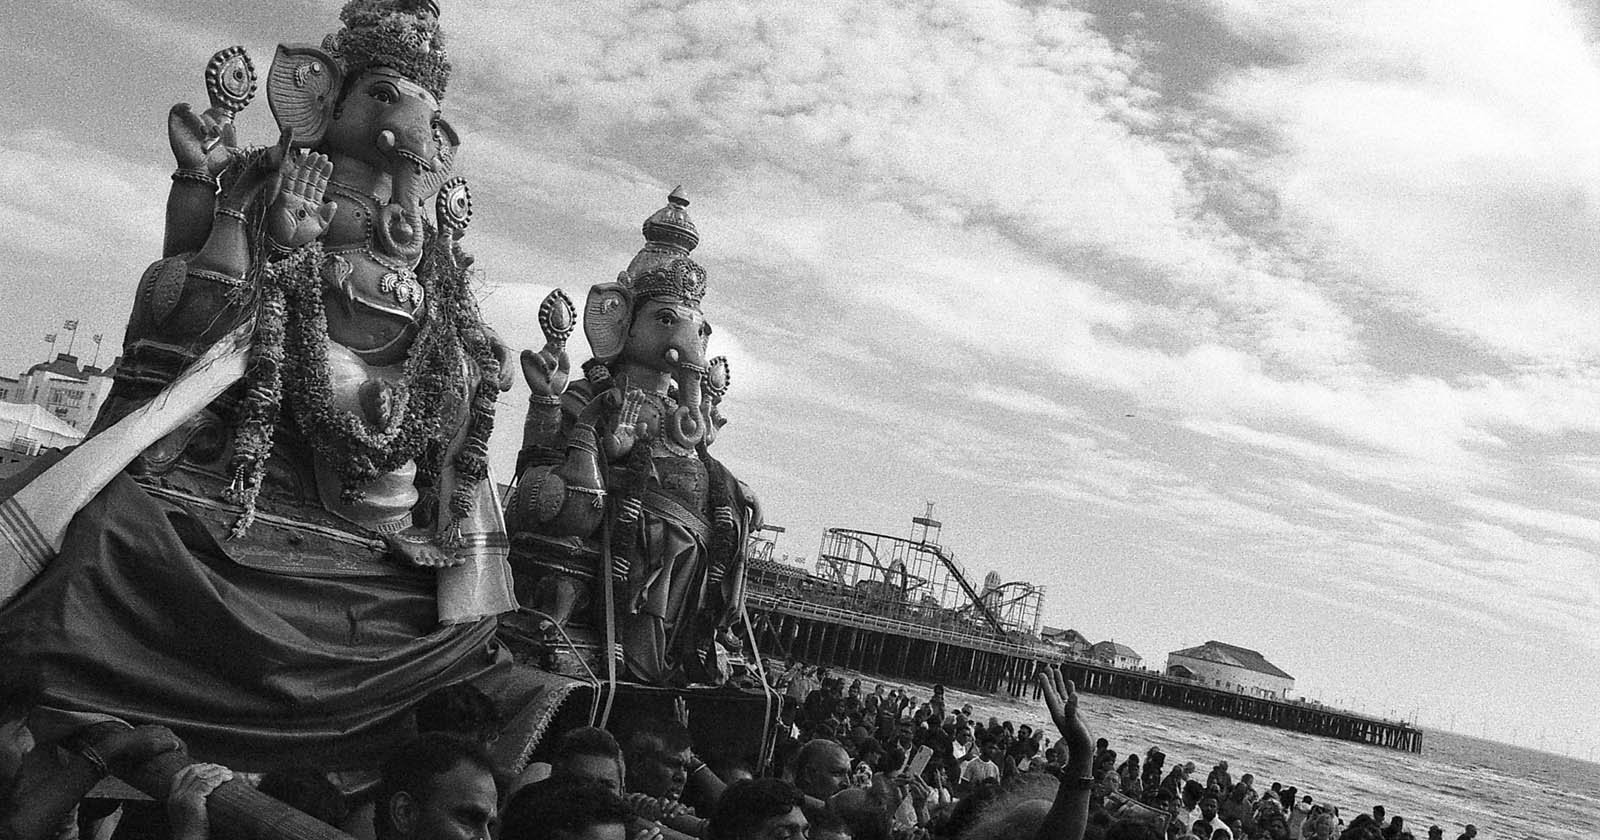  photographing hindu sea procession iconic british seaside town 